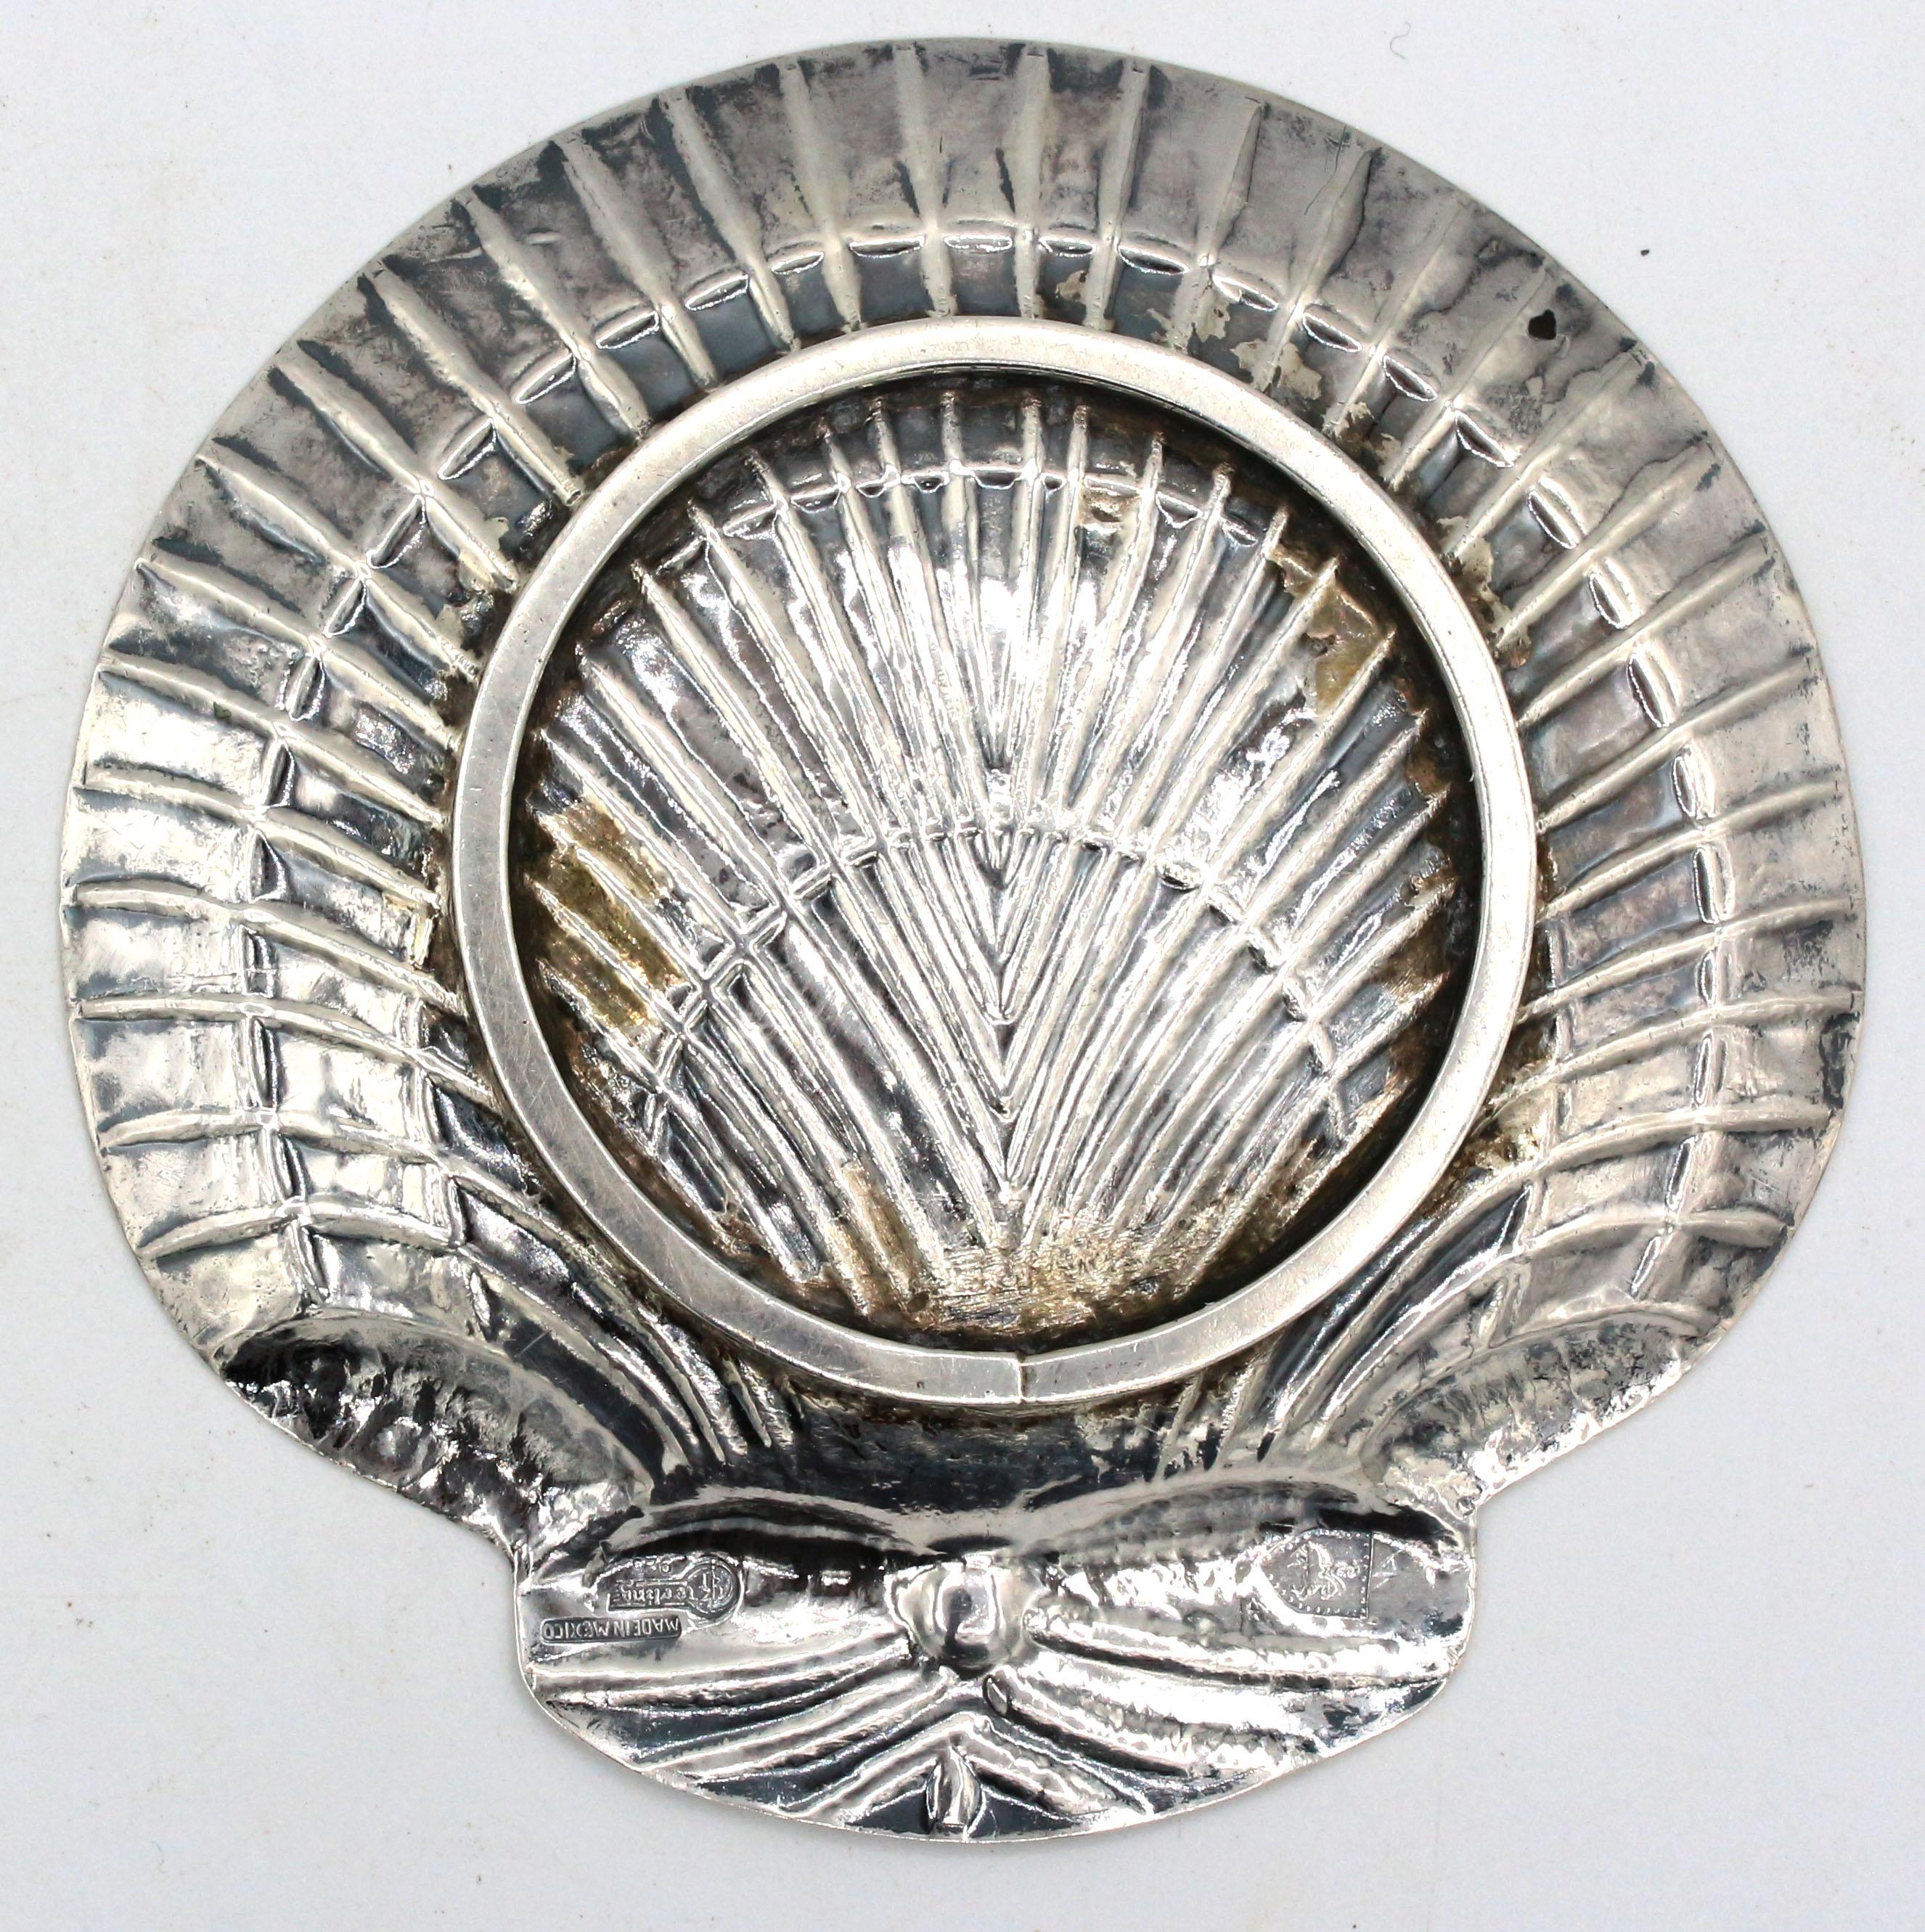 Sterling silver scallop shell dish, made in Mexico. Applied ring base. Marks: 925, Sterling, Knight in Shield & Made in Mexico. 6.55 troy oz.
5 5/8